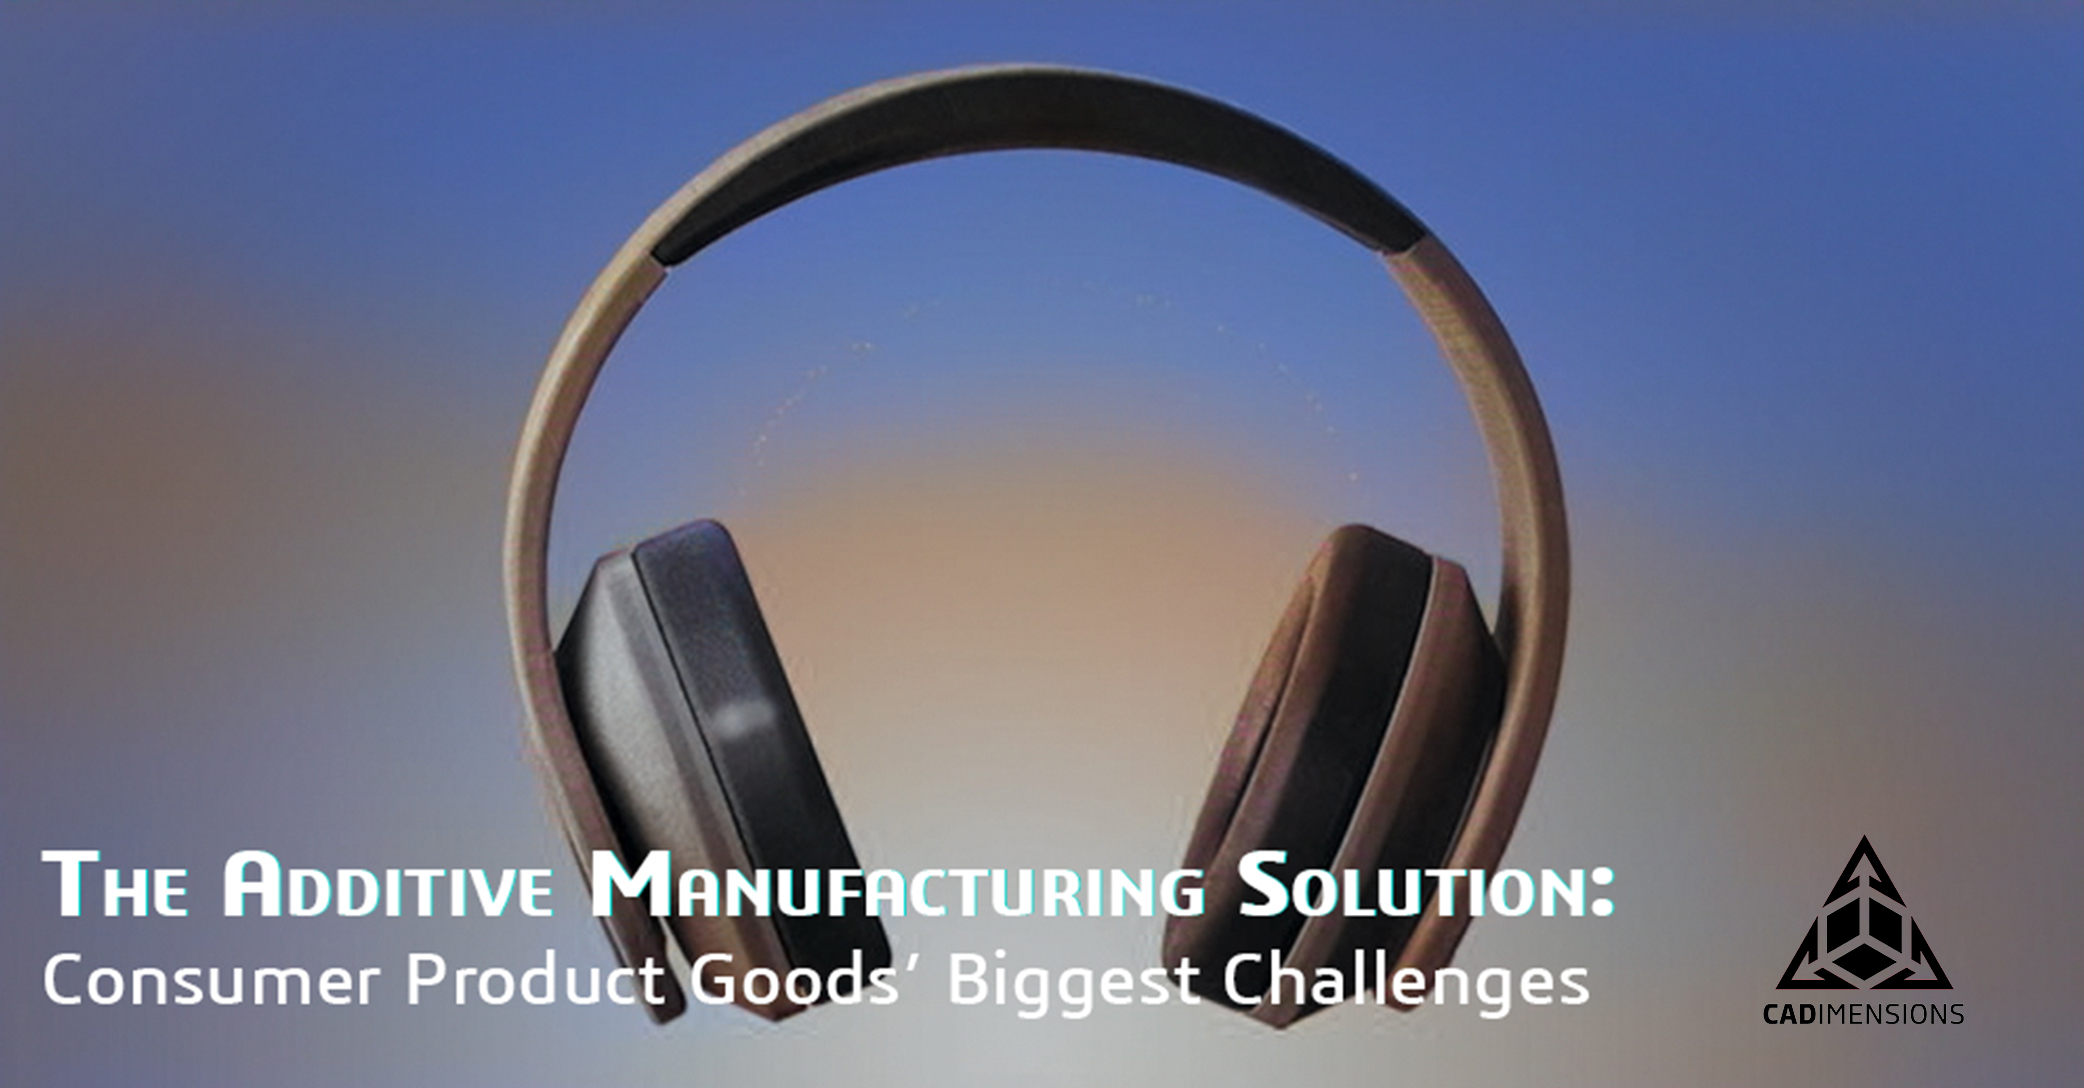 Consumer Product Industry Challenges Overcome with Additive Manufacturing